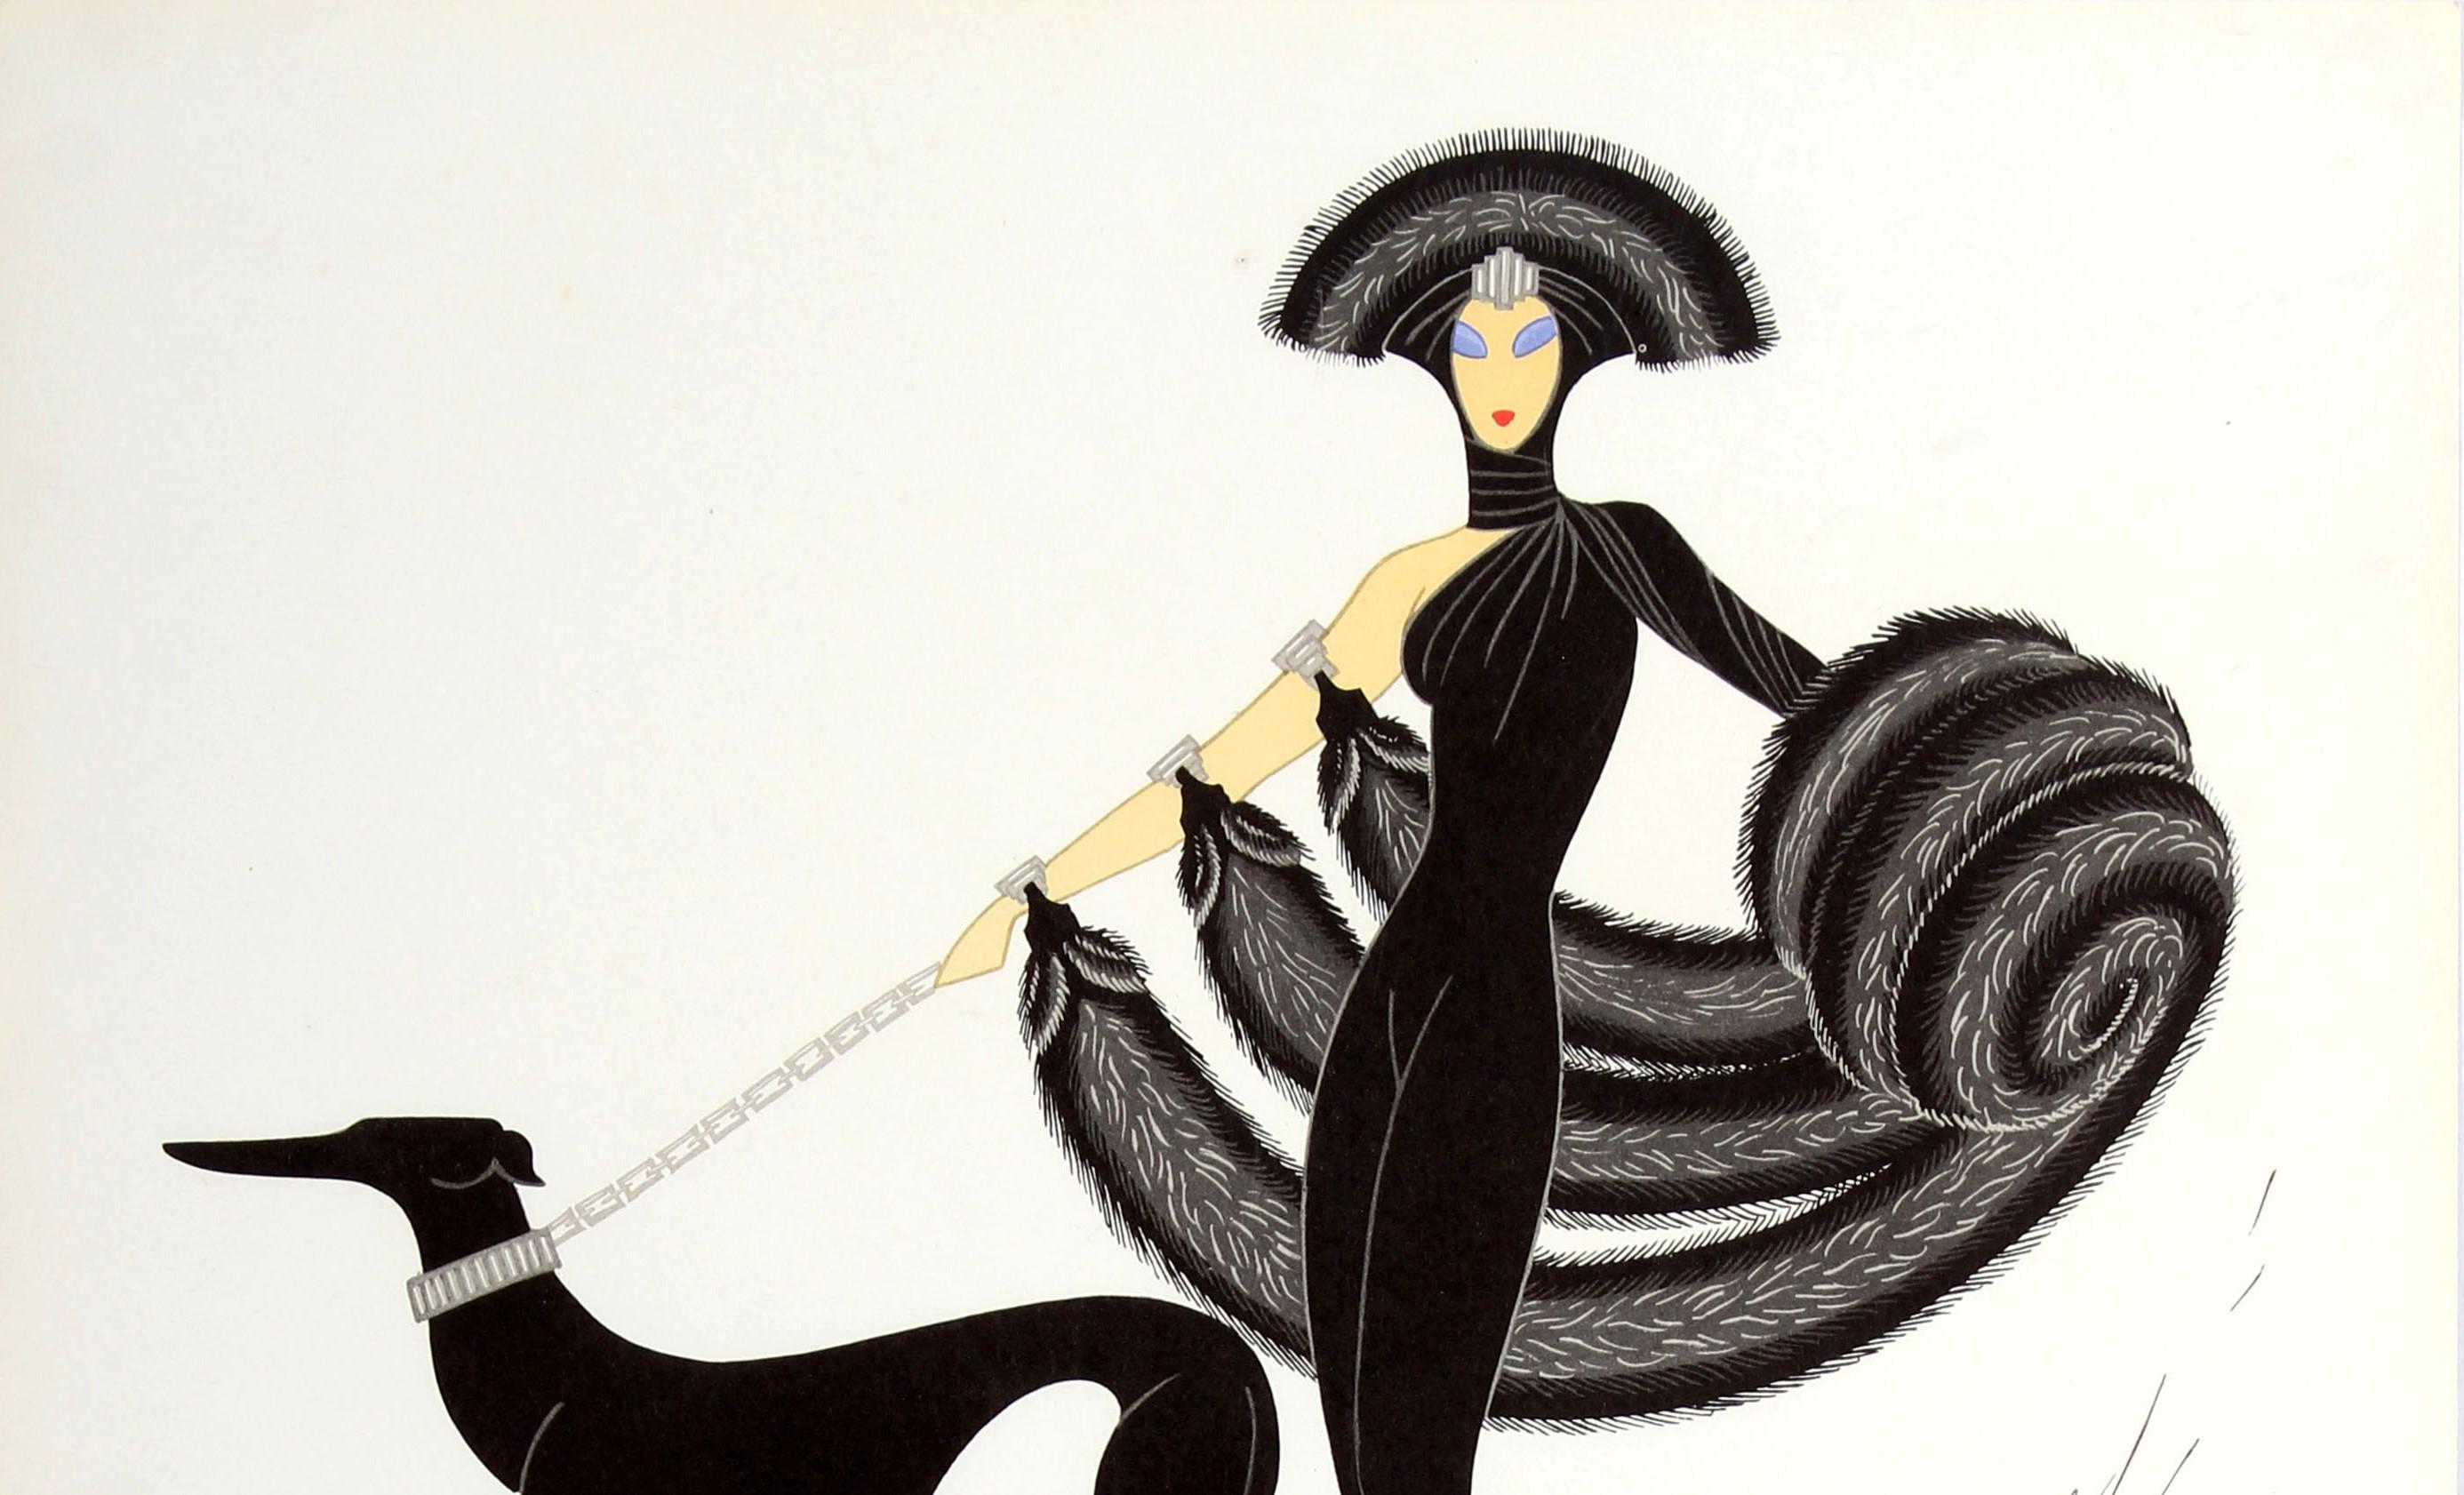 Original Vintage Art Deco Style Erte Exhibition Poster Ft Lady And Greyhound Dog - Print by Erté